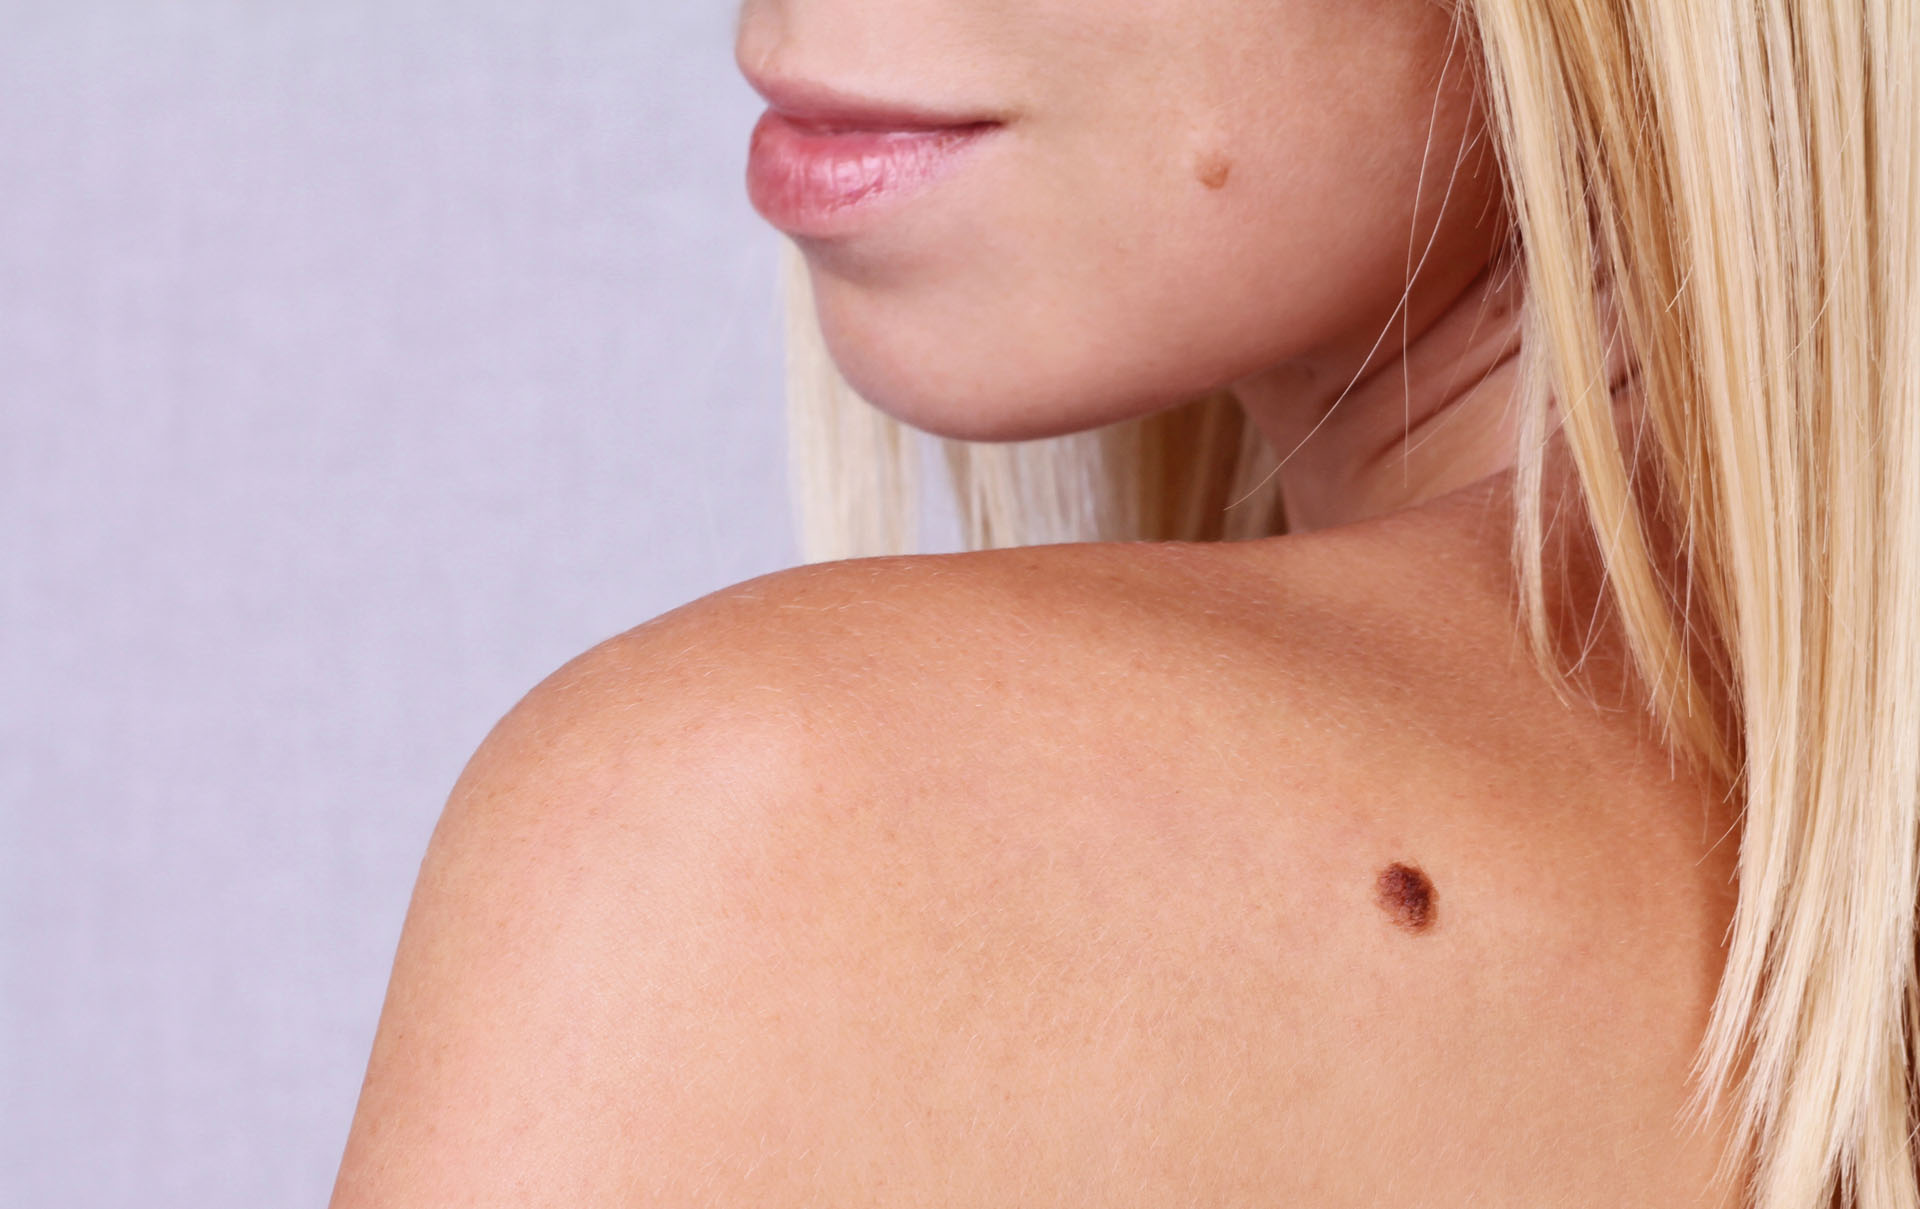 Young woman with birthmark on her face, back, skin. Checking benign moles. Skin tags removal